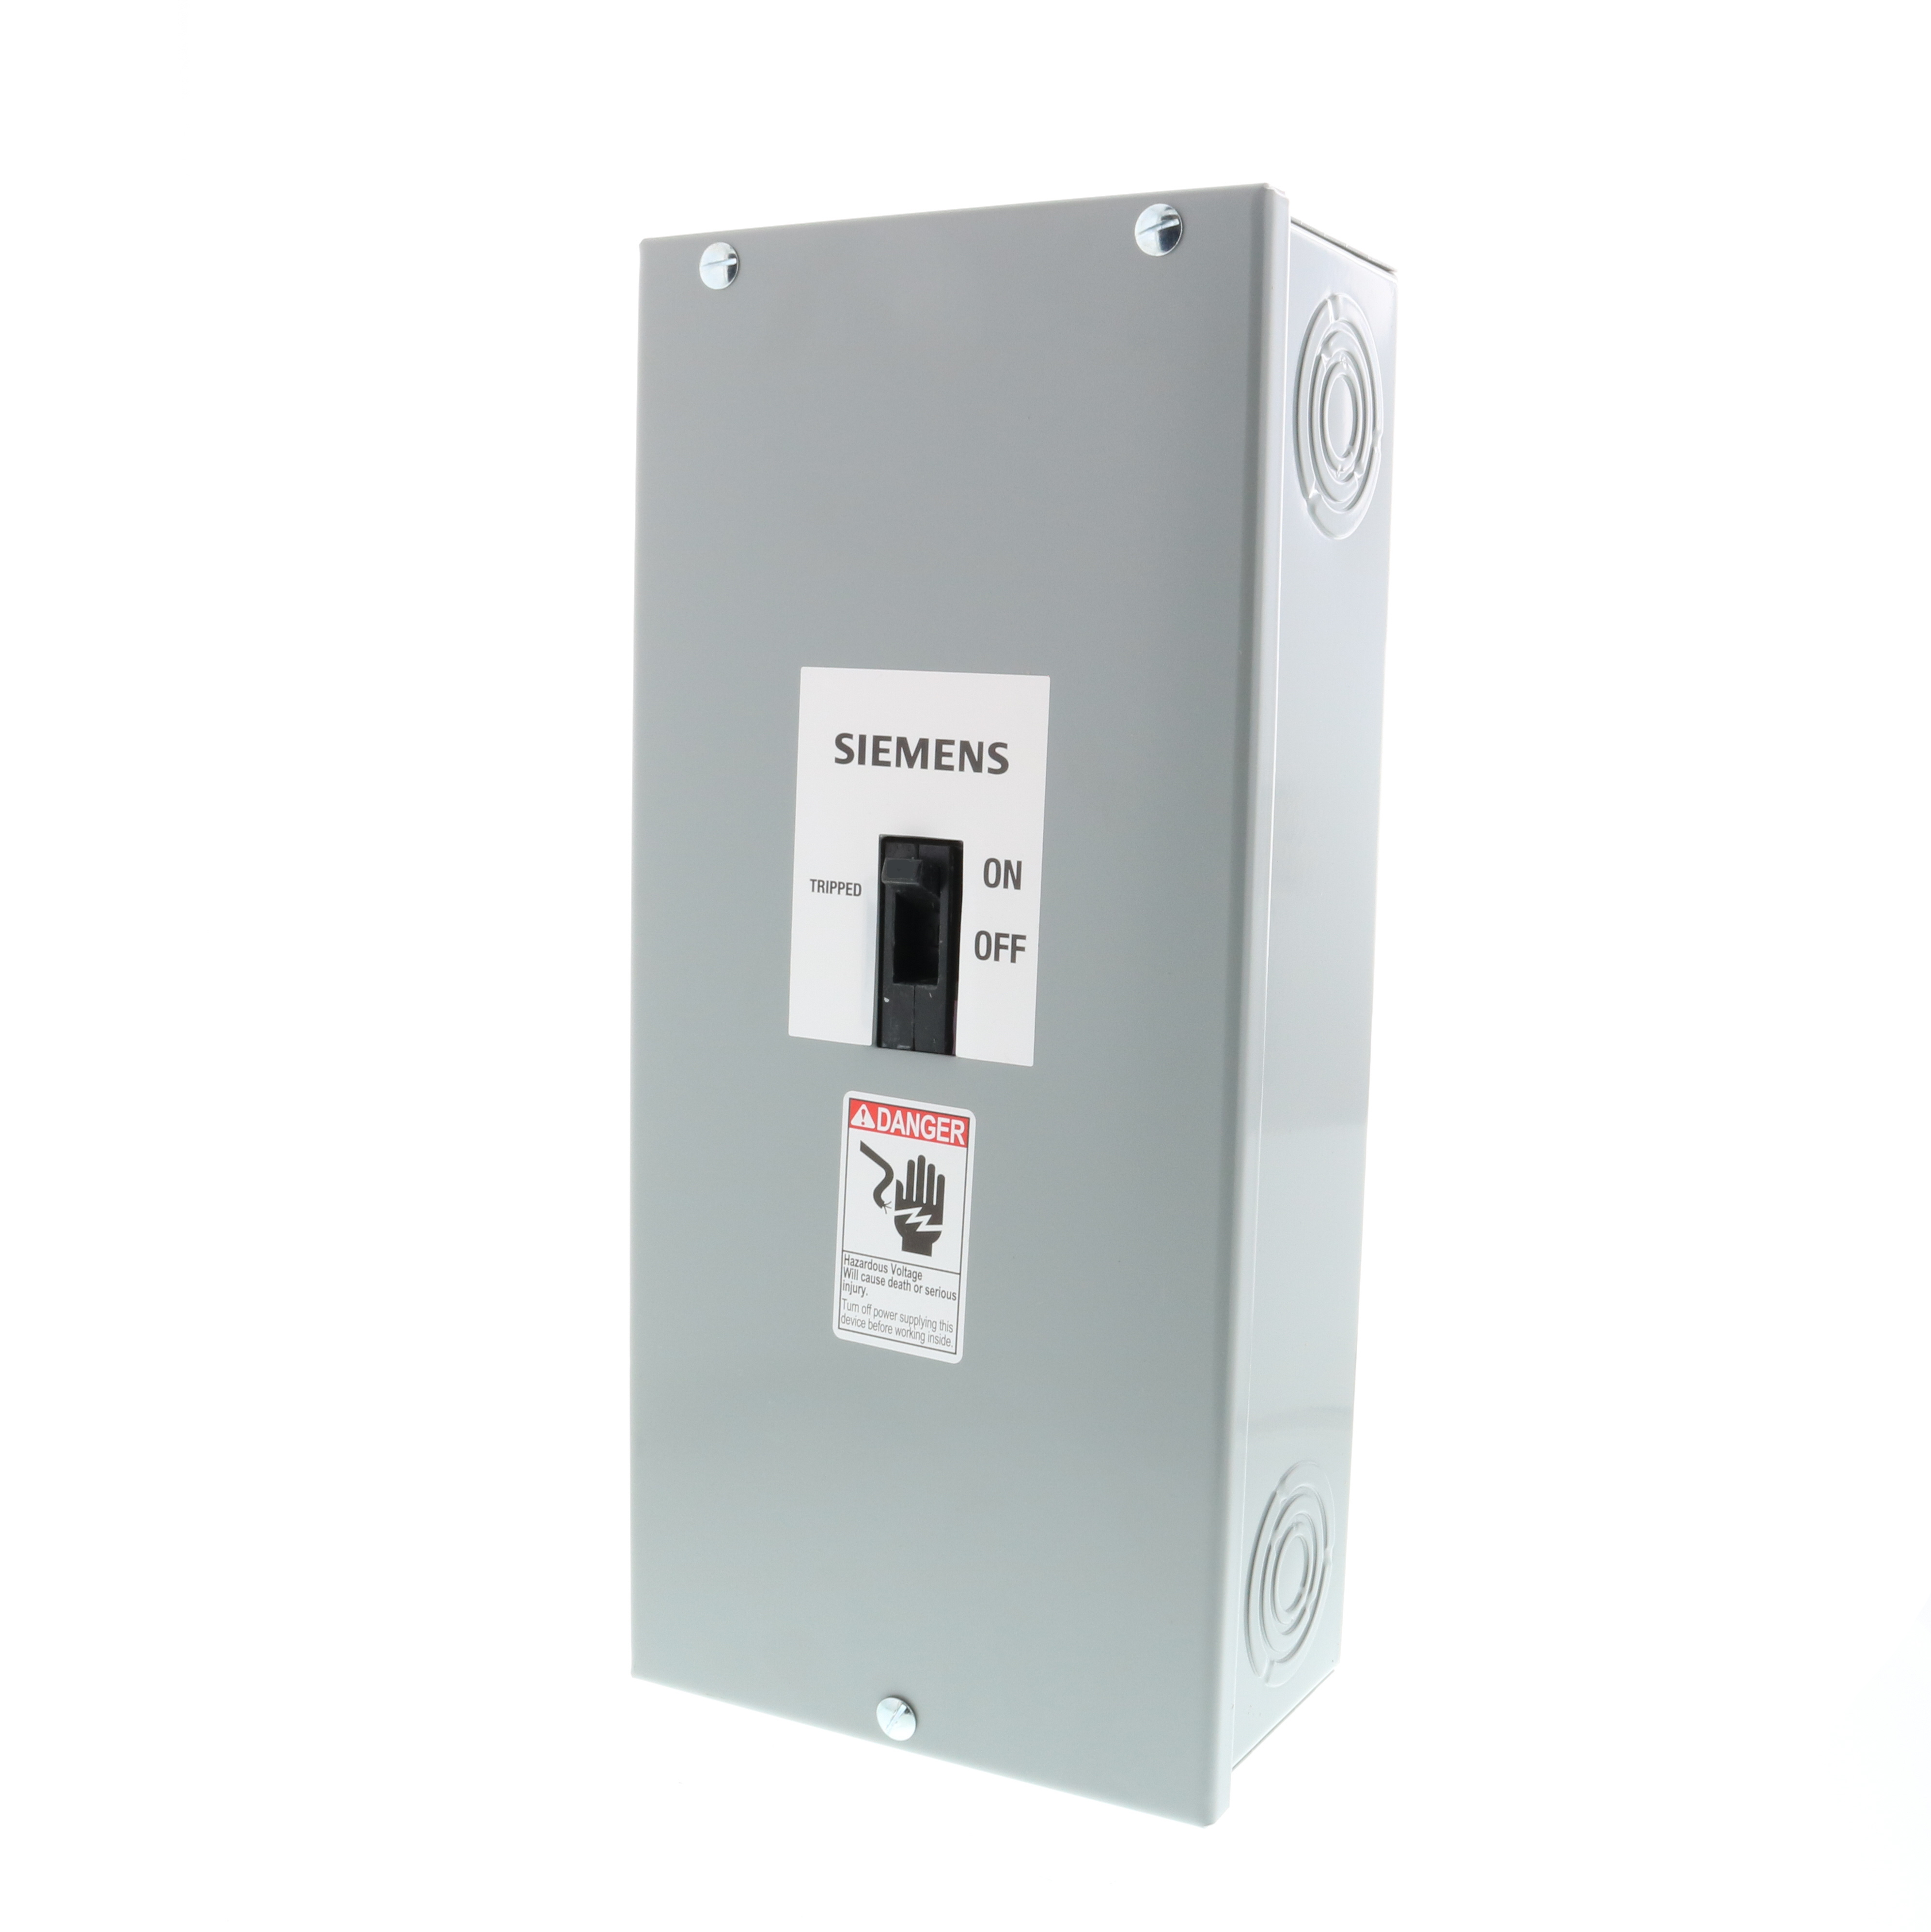 SIEMENS LOW VOLTAGE ENCLOSED SENTRON MOLDED CASE CIRCUIT BREAKER (ASSEMBLED) WITH THERMAL - MAGNETIC TRIP UNIT. 90A 3-POLE 600V STANDARD 40 DEG C BREAKER FD FRAME WITH STANDARD BREAKING CAPACITY (FXD63B090). NON-INTERCHANGEABLE TRIP UNIT. NEMA TYPE 1 ENCLOSURE SURFACE MOUNTED (F6N1S). ORDER NEUTRAL (N250). INCLUDES LINE AND LOAD SIDE LUGS (TA1FD350A) WIRE RANGE 6AWG - 350KCMIL (CU) / 4AWG - 350KCMIL (AL). ENCLOSURE DIMENSIONS (W x H x D) IN 11.47 x 38.41 x 5.06.